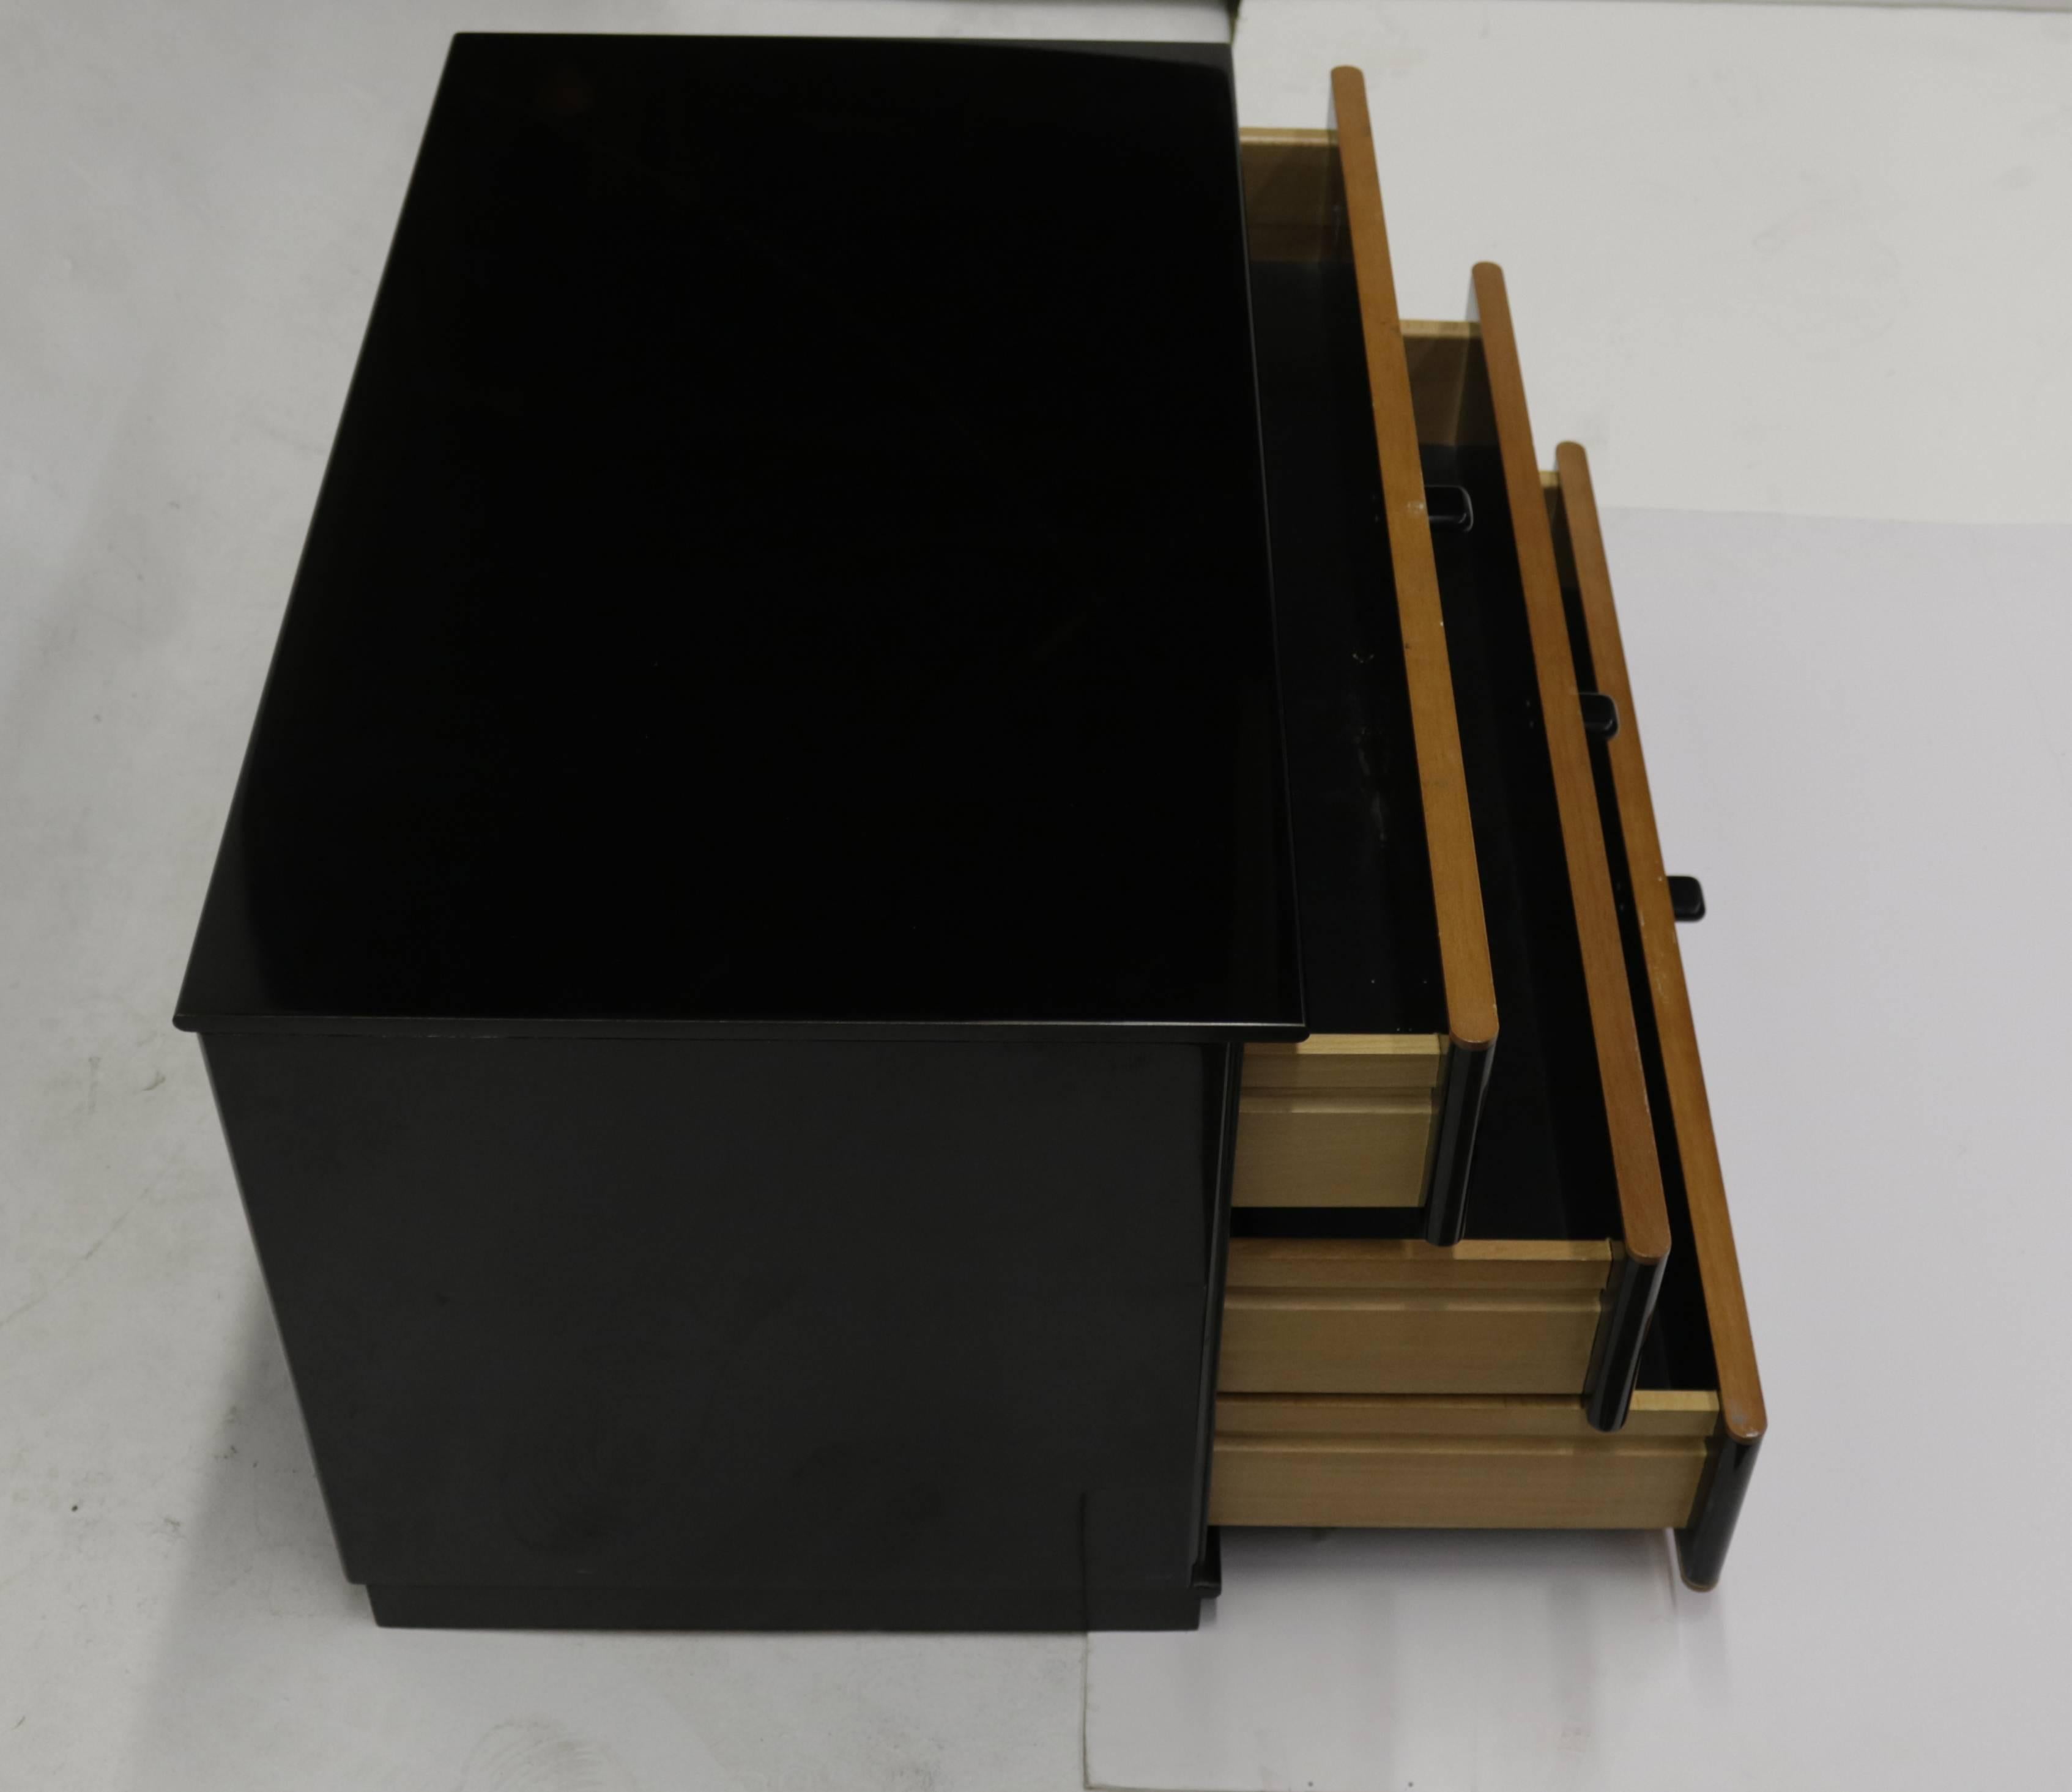 Pair of black lacquer and light wood beadings nightstands or side tables made in the 1980s.